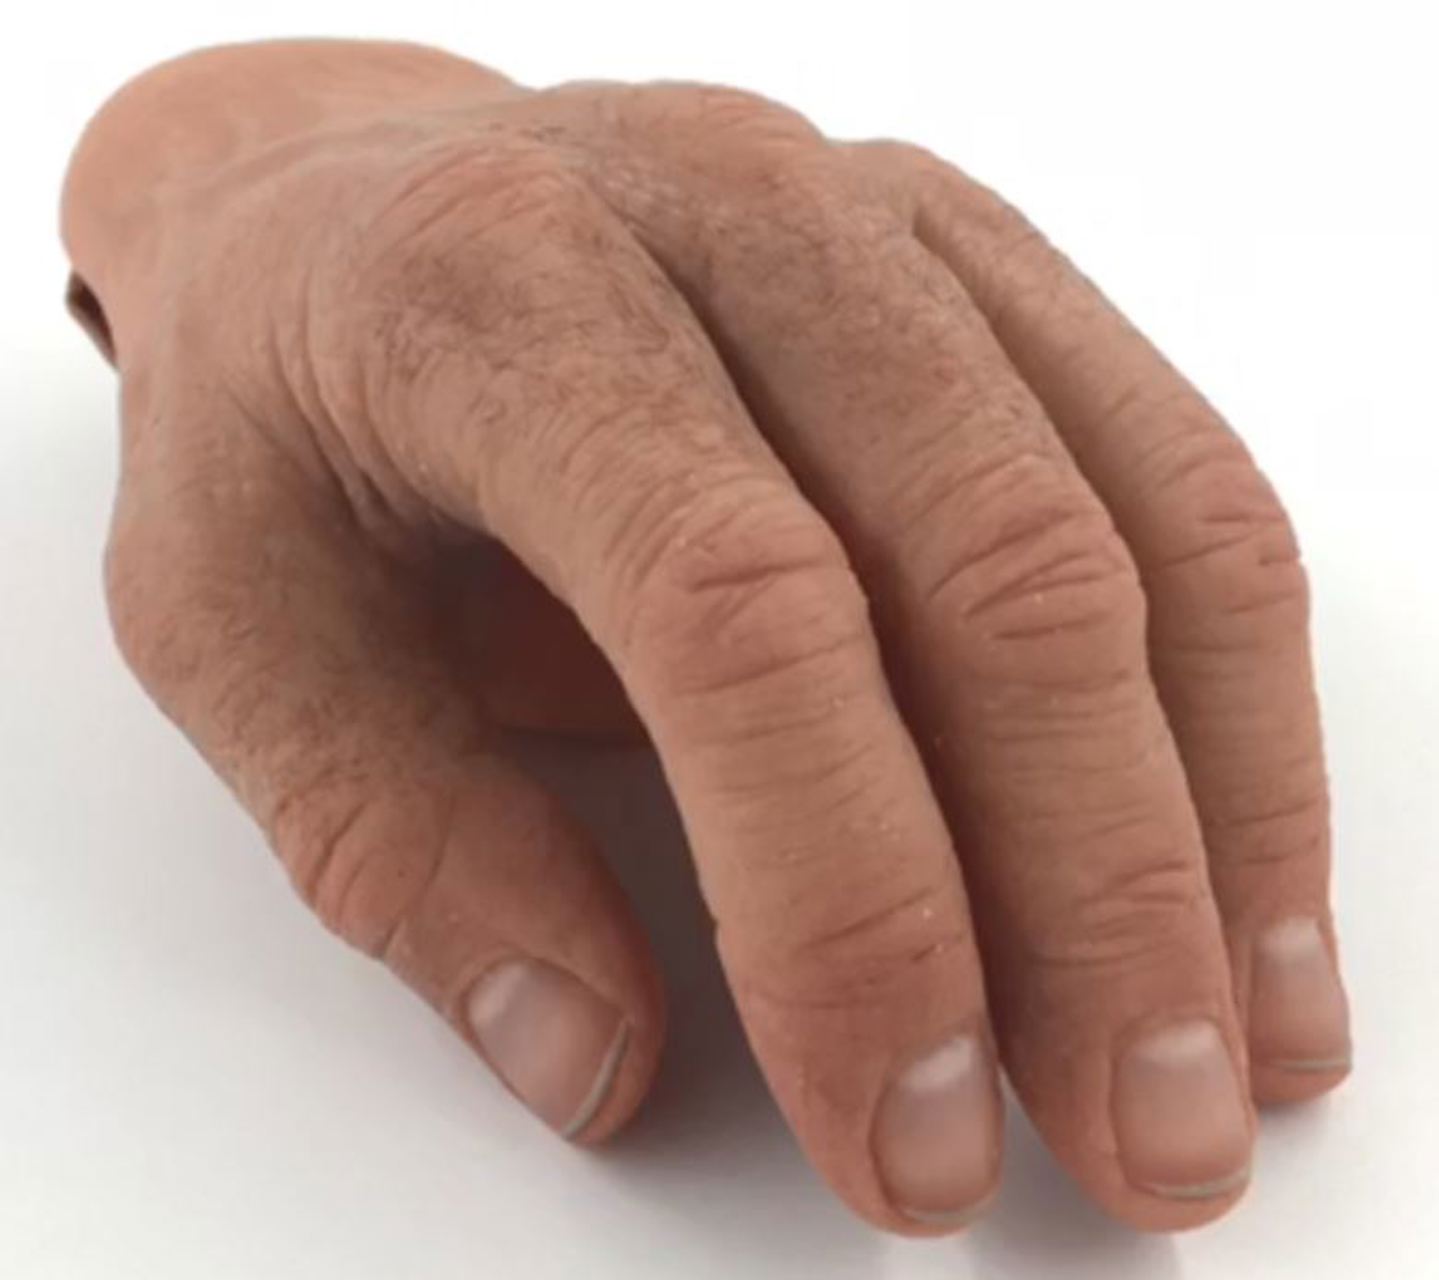 Silicone Hand Spronken orthopedie